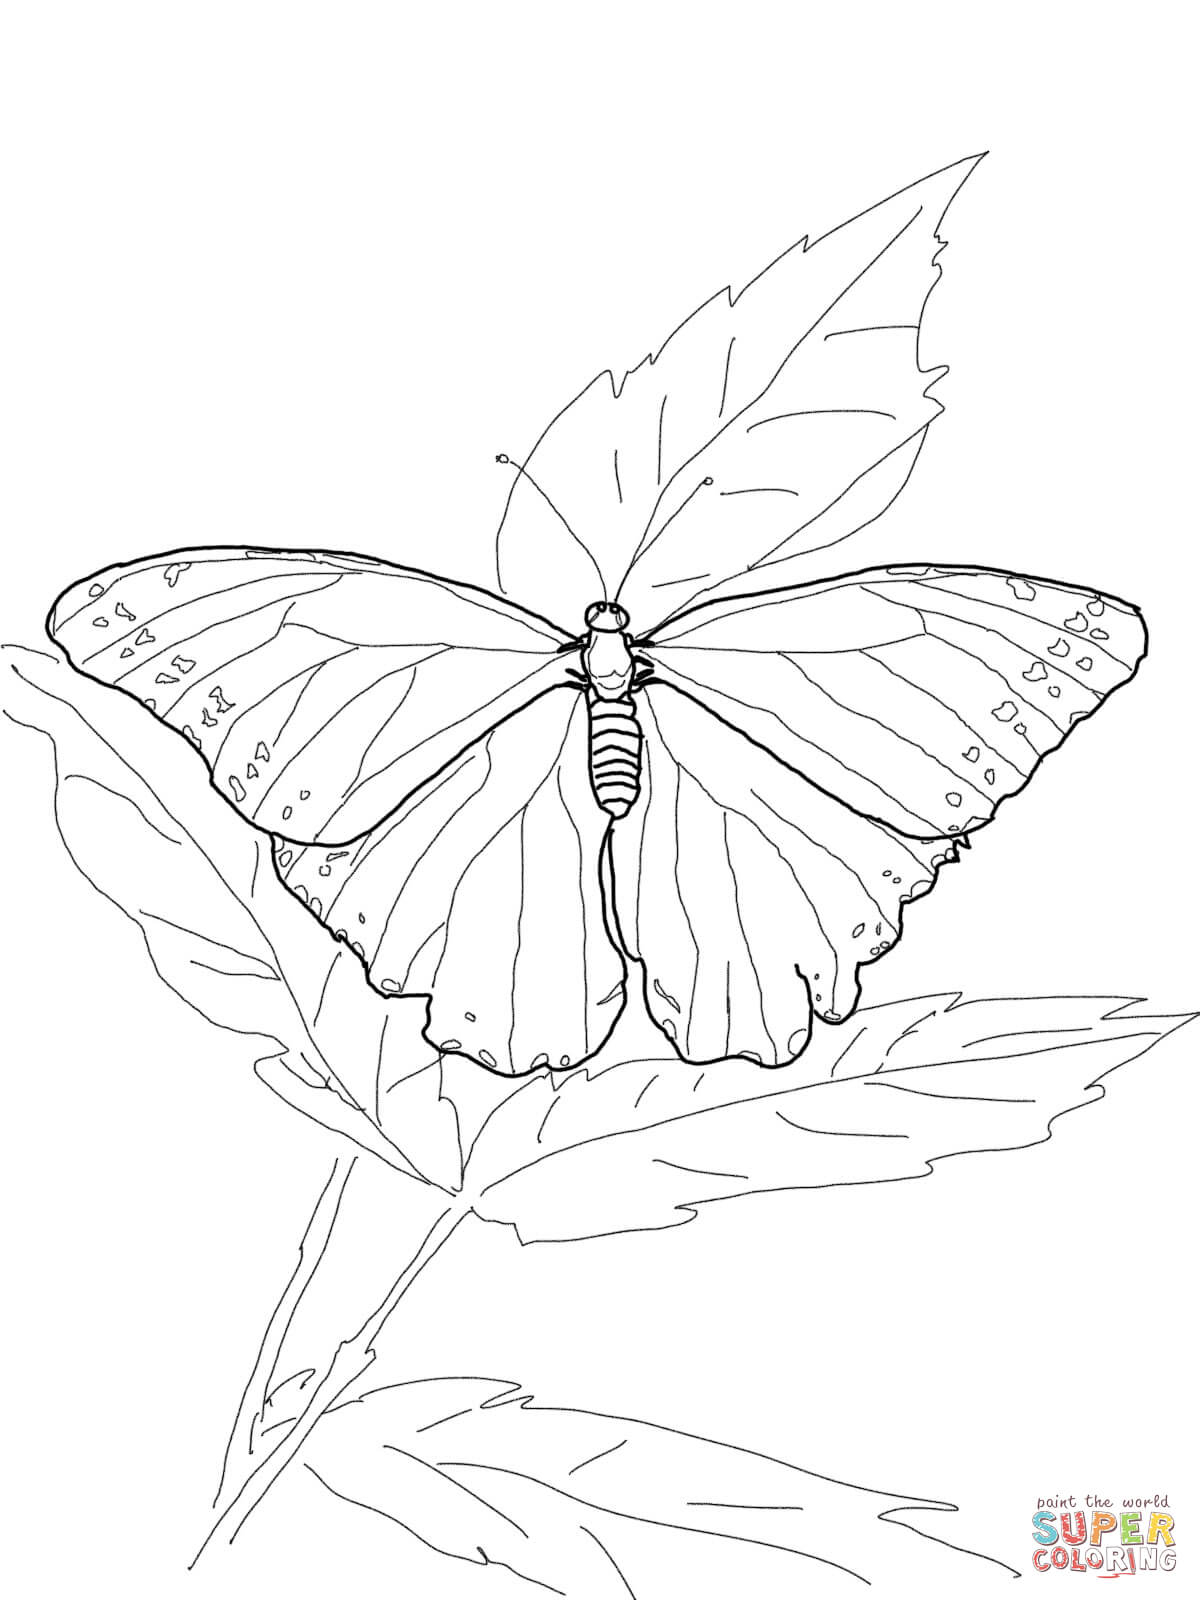 Butterfly Outline Coloring Page Coloring Books Butterflies Outline Collection Of Butterfly Clipart